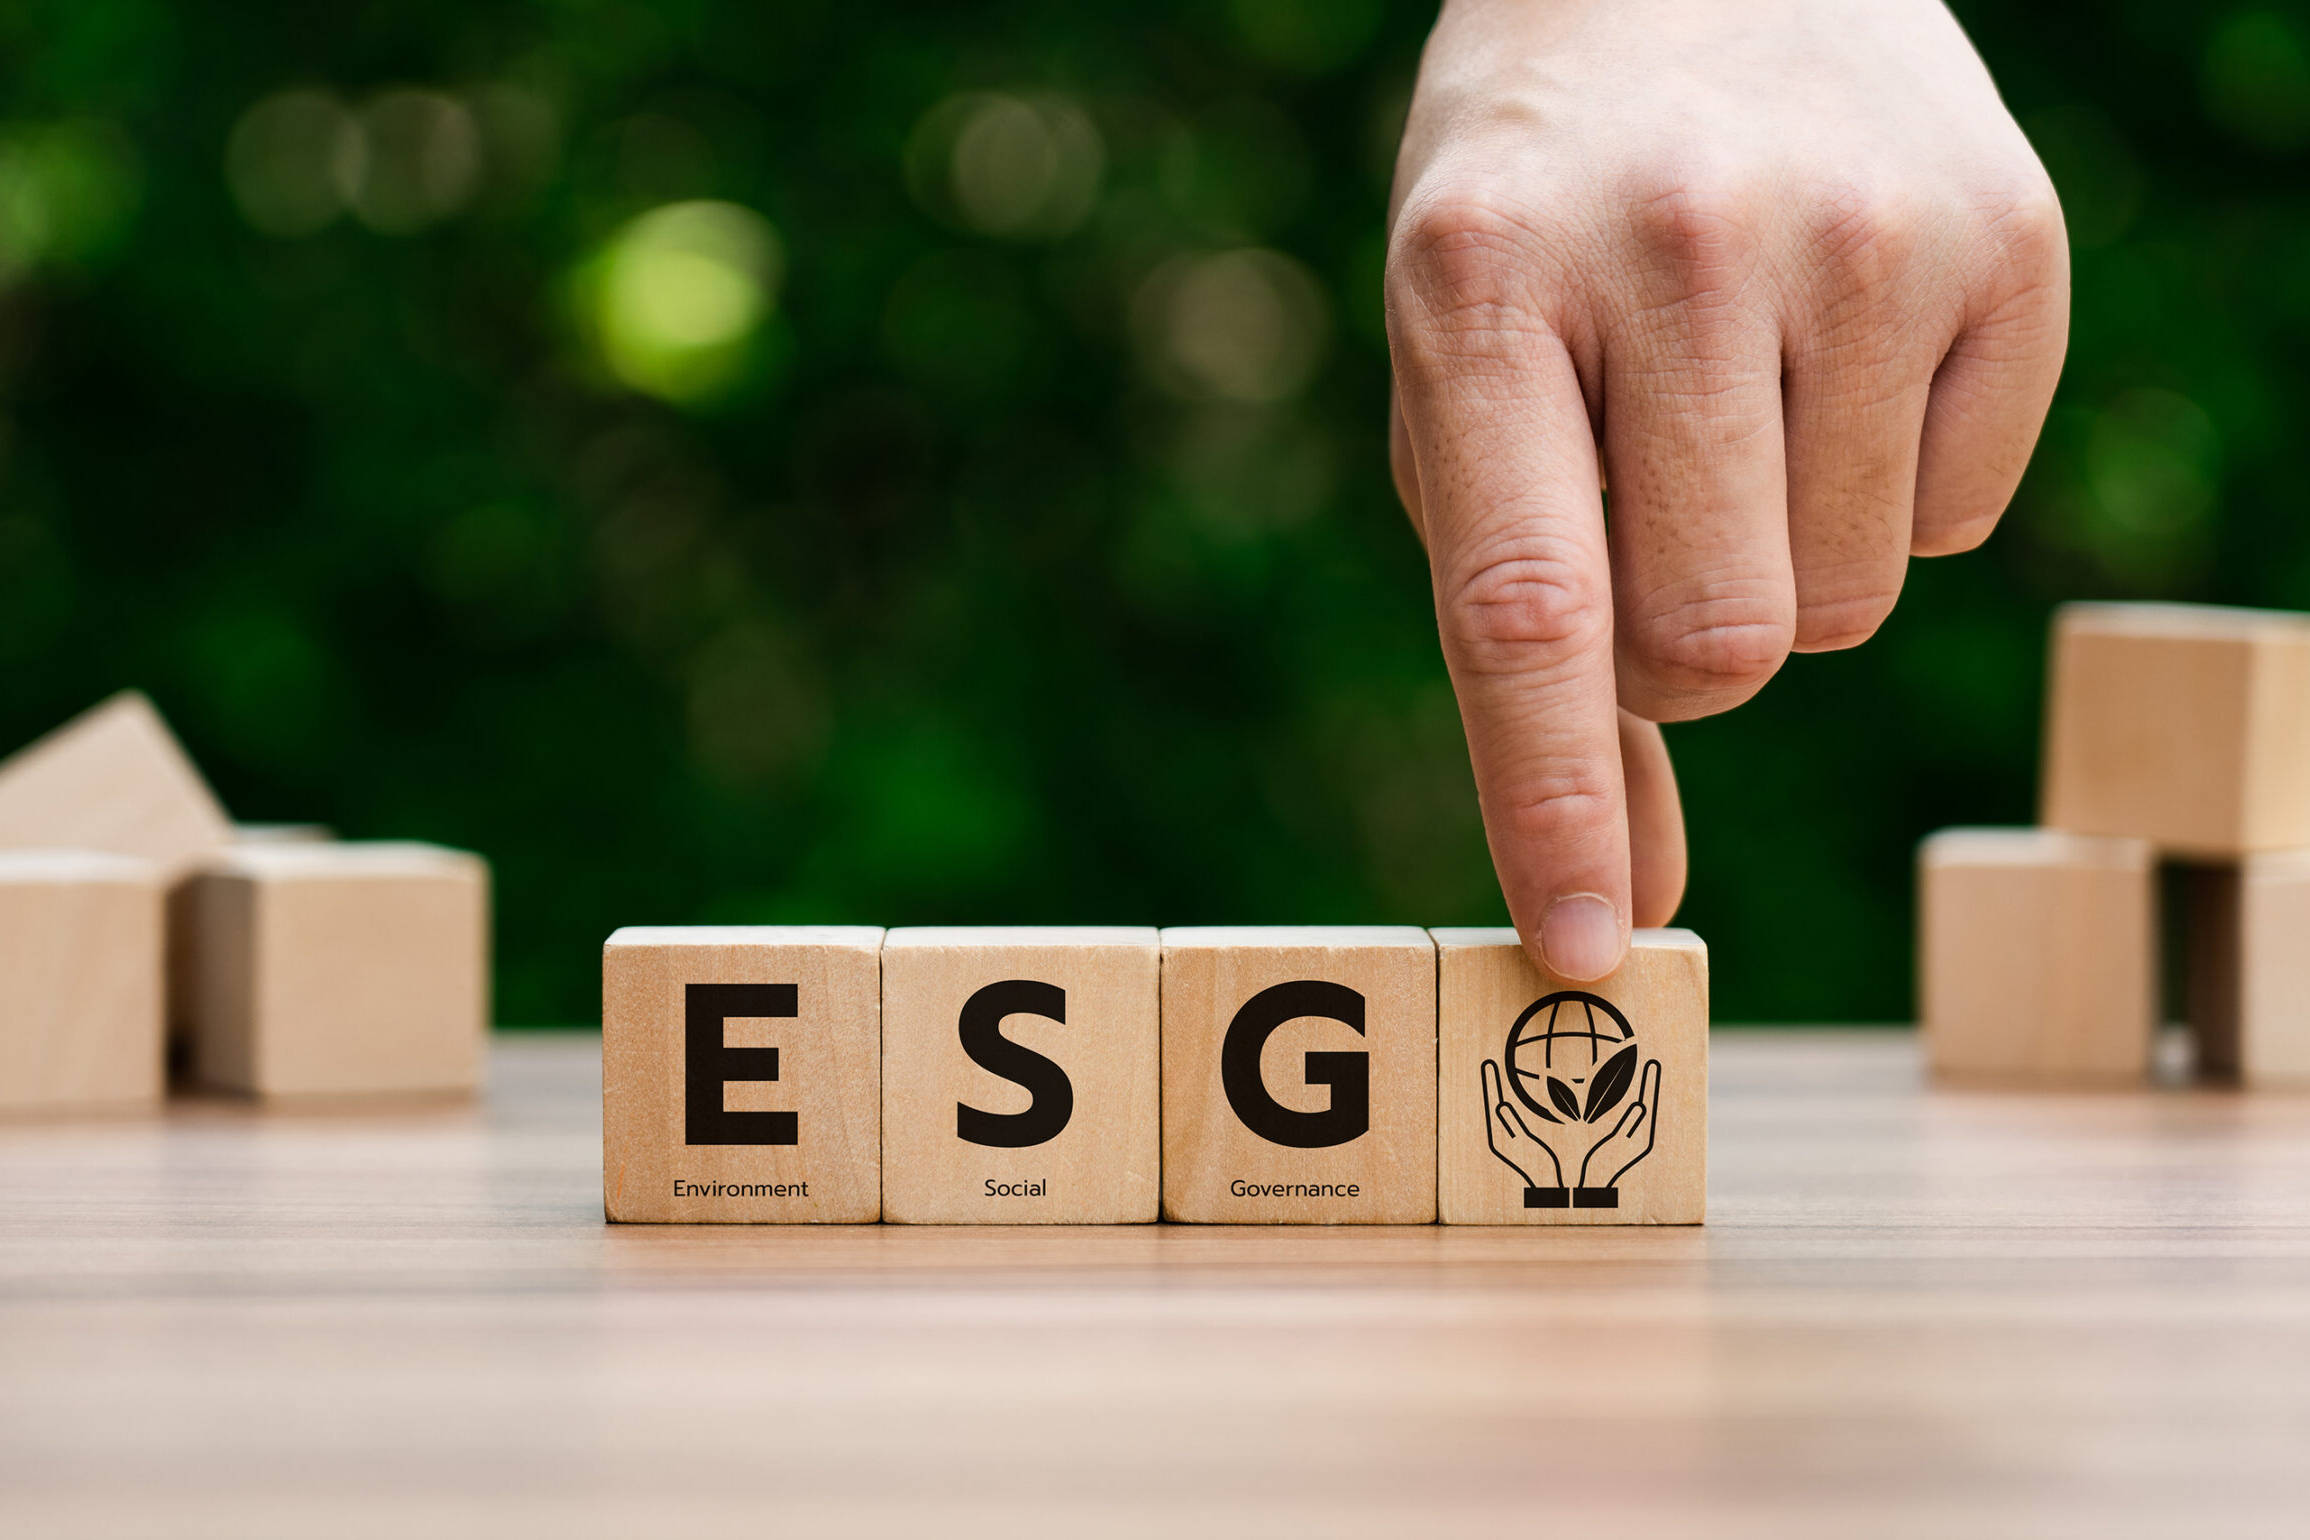 ESG concept of environmental, social and governance. Sustainable corporation development. long-term sustainability and societal impact of companies, organizations, and investments.